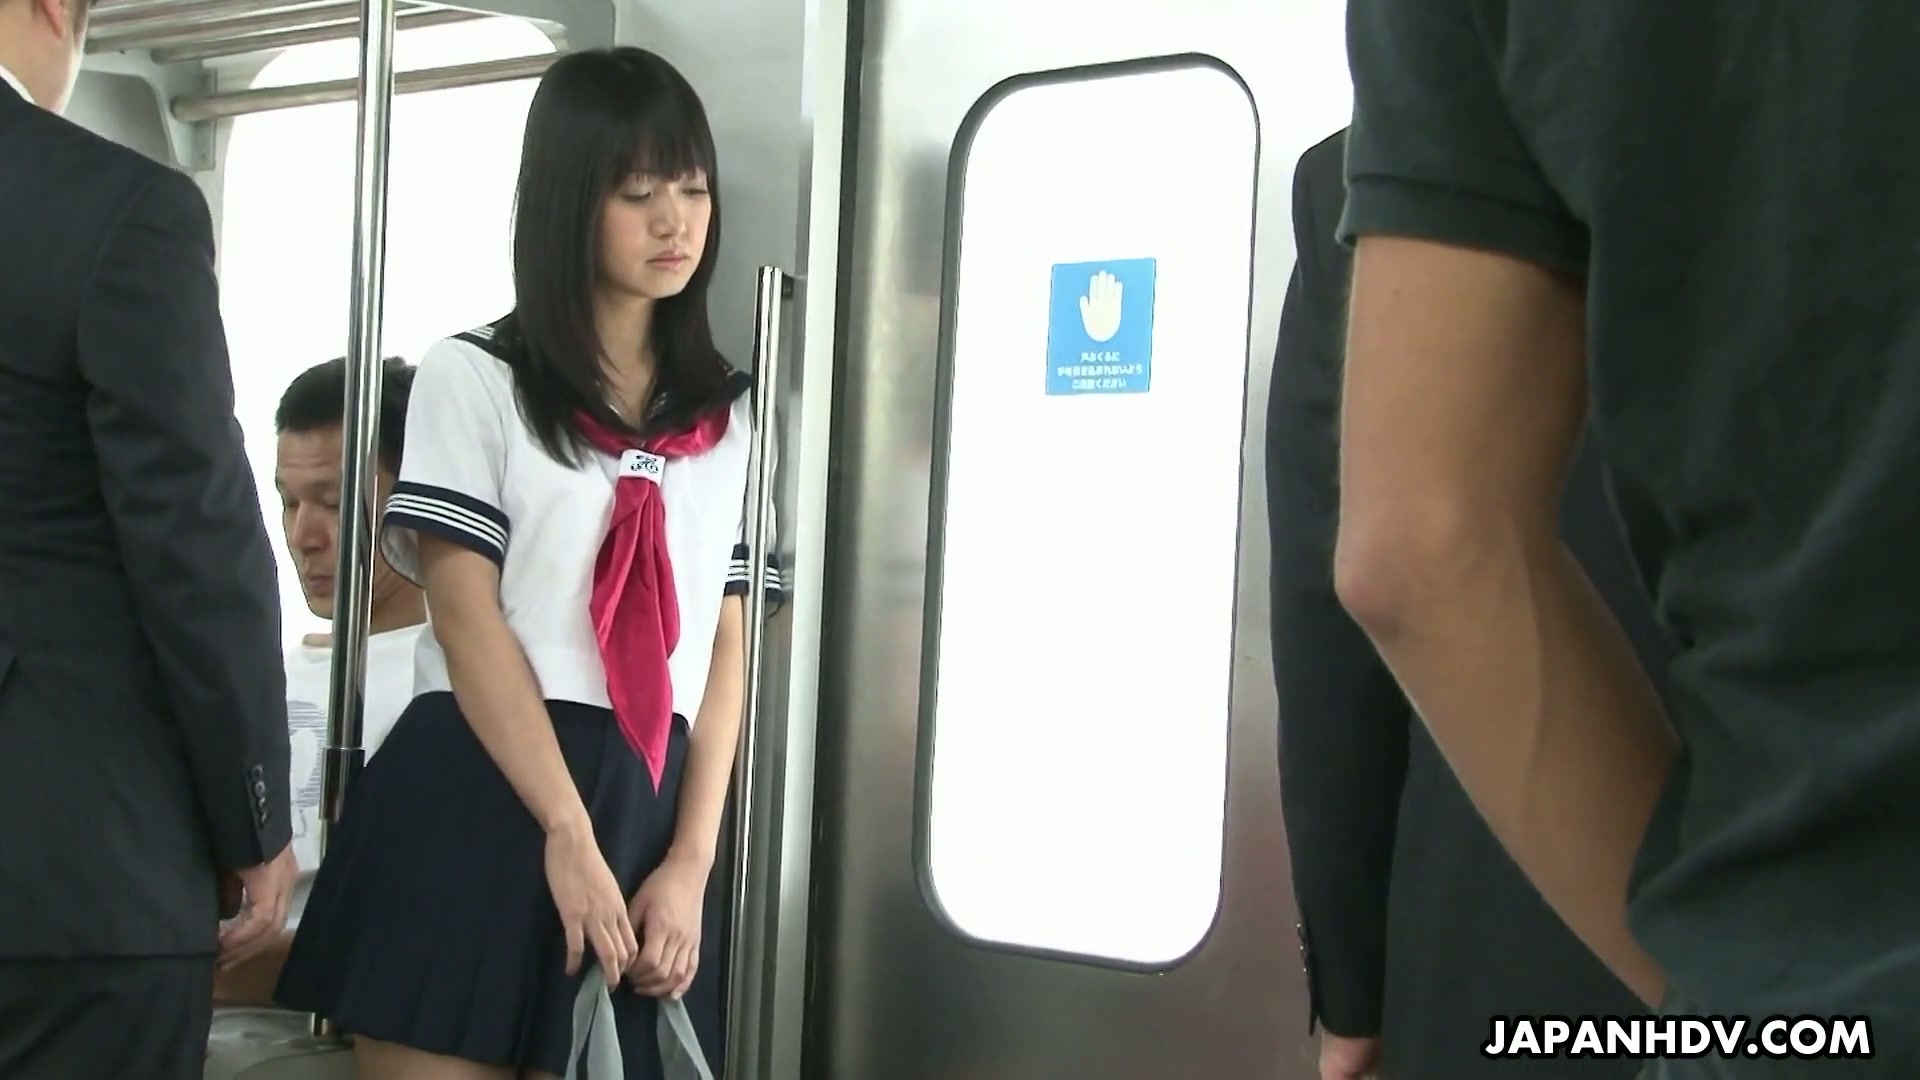 Jap college girl Yayoi Yoshino gets finger fucked by strangers in subway photo